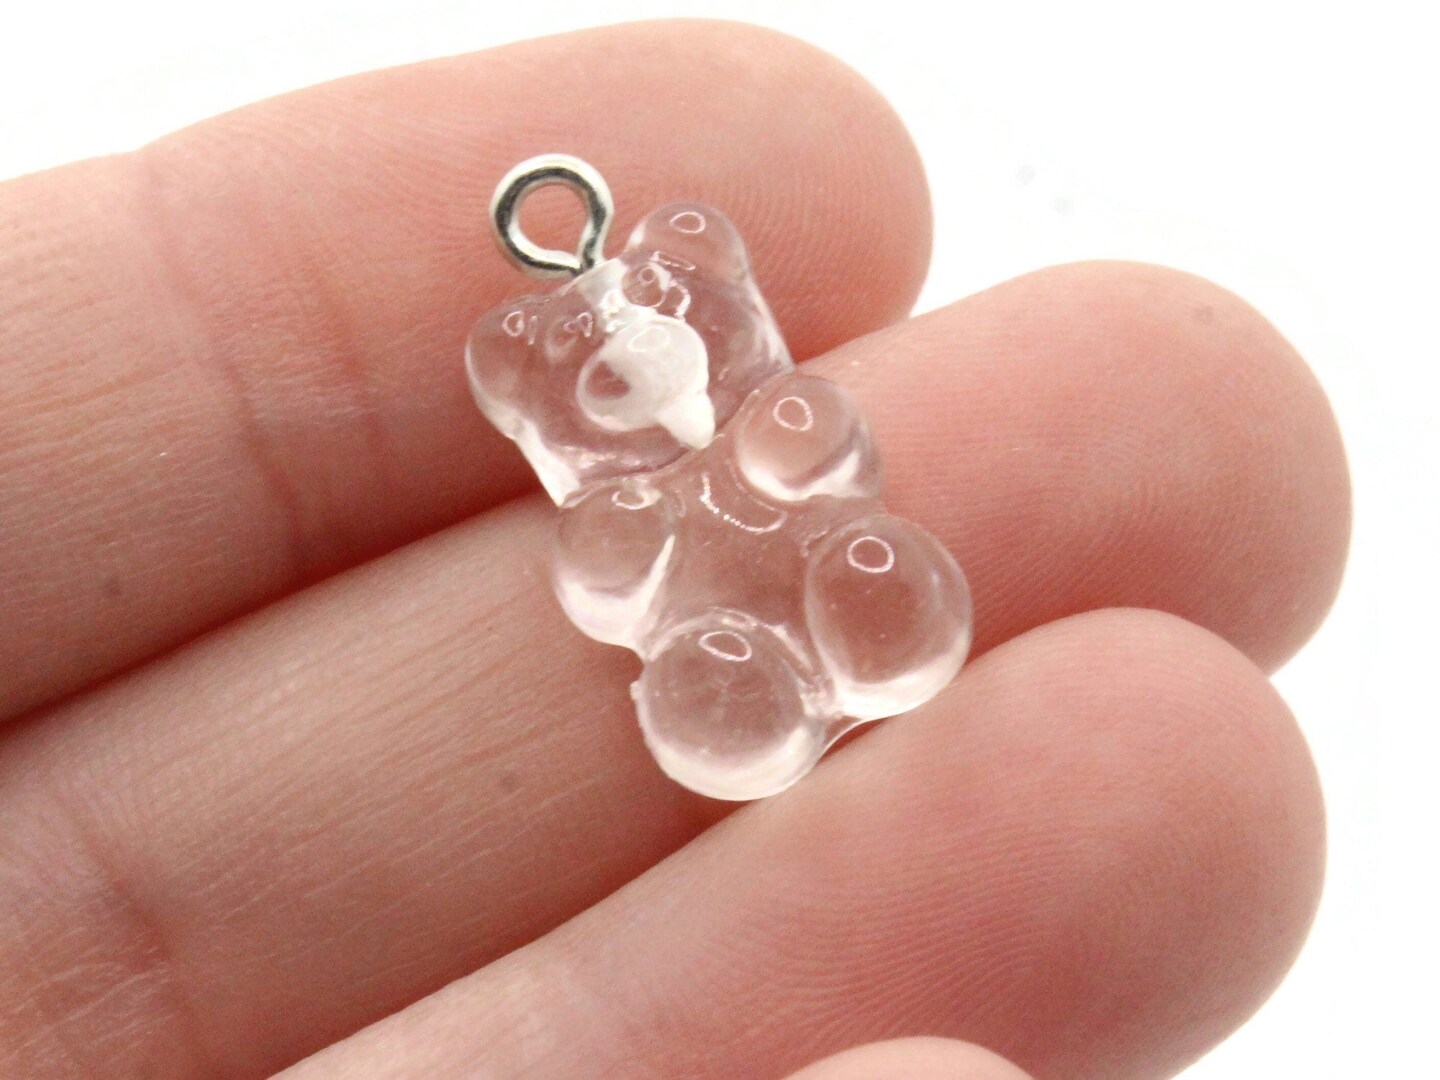 Build Your Own ~ Resin Gummy Bear Charm Collection